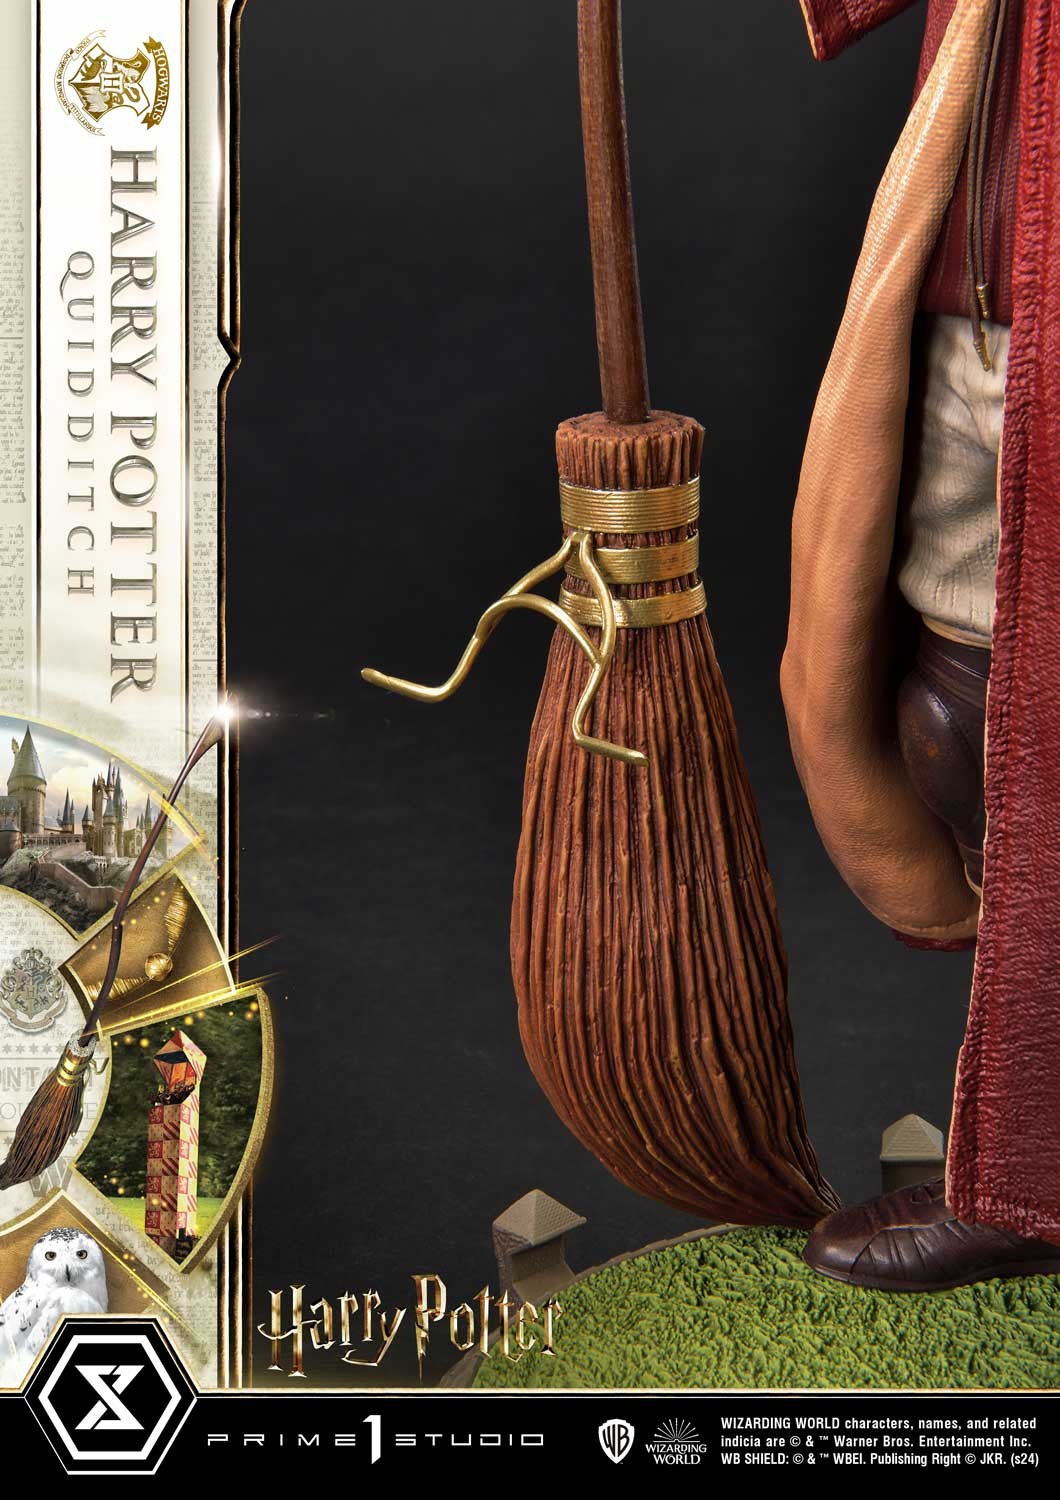 Harry Potter (Quidditch Edition) (Prototype Shown) View 25